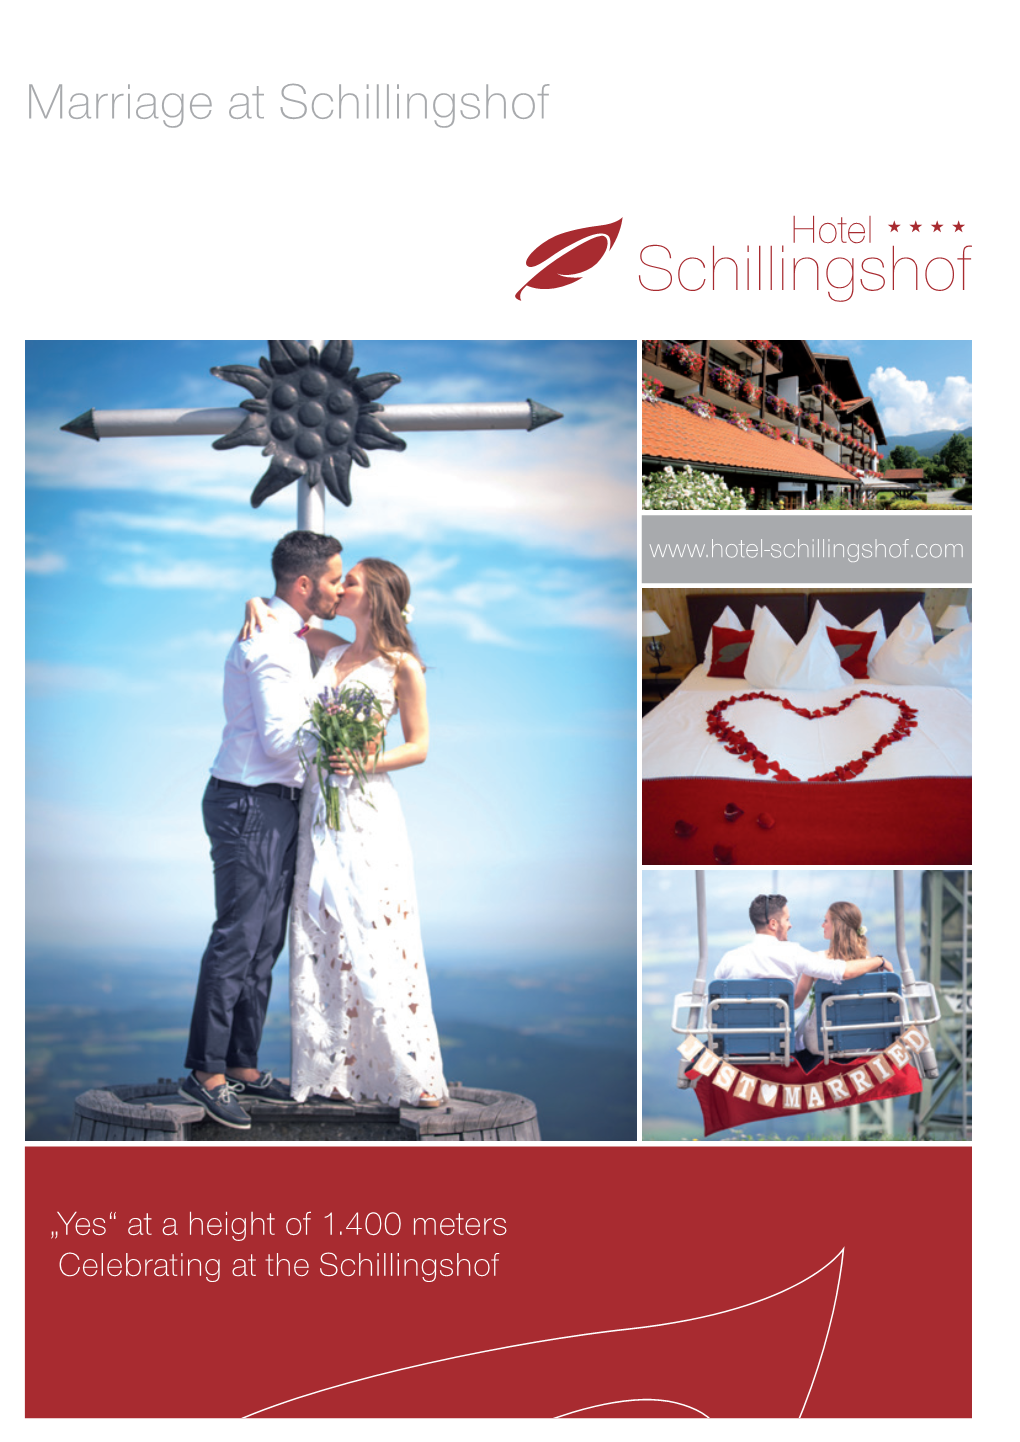 Marriage at Schillingshof